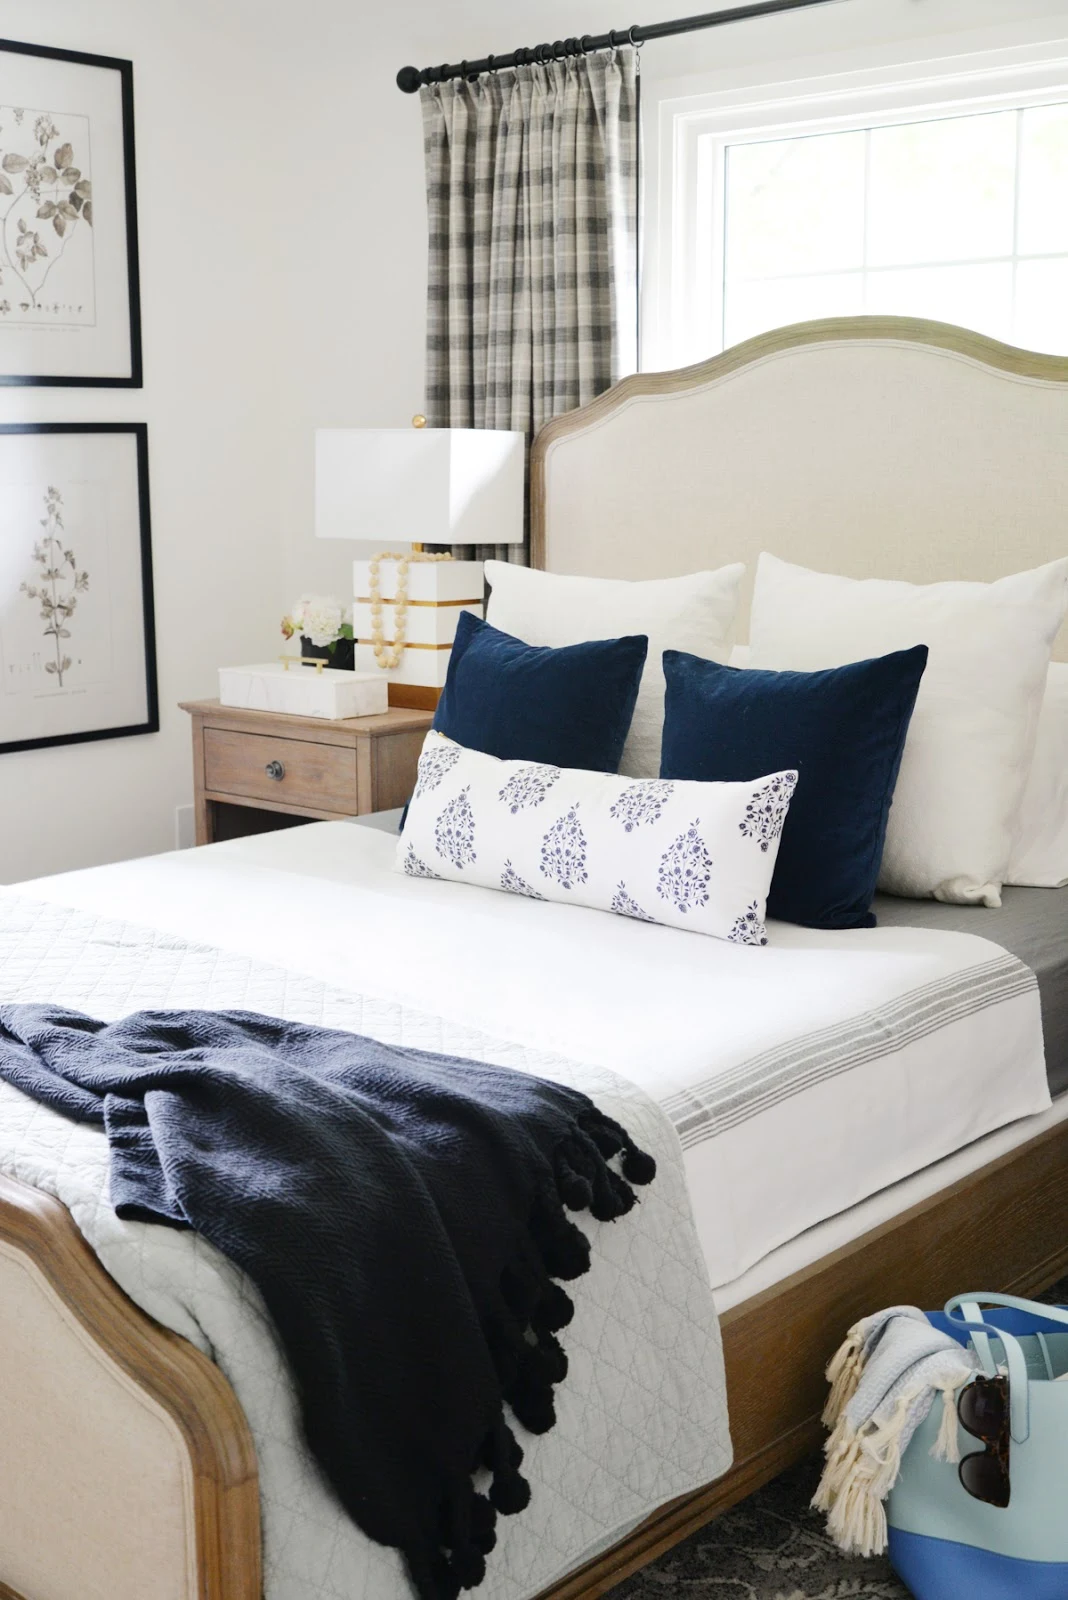 6 easy ways to bring summer into your home, summer decor, white blue bedding